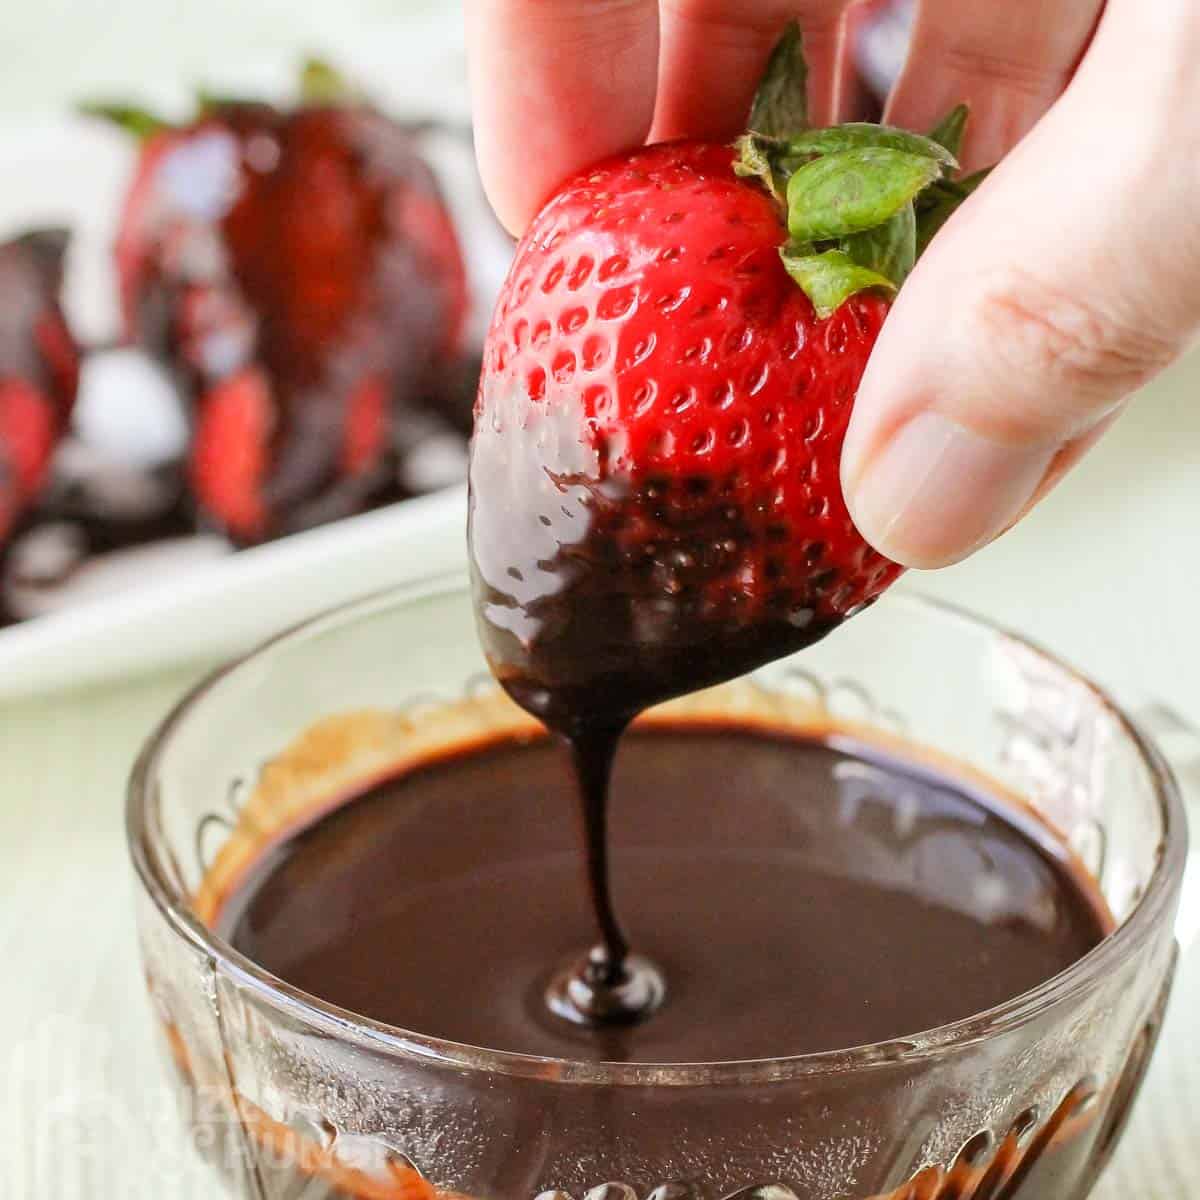 Close up shot of a strawberry being dipped into a clear bowl of chocolate sauce with more chocolate covered strawberries in the background.